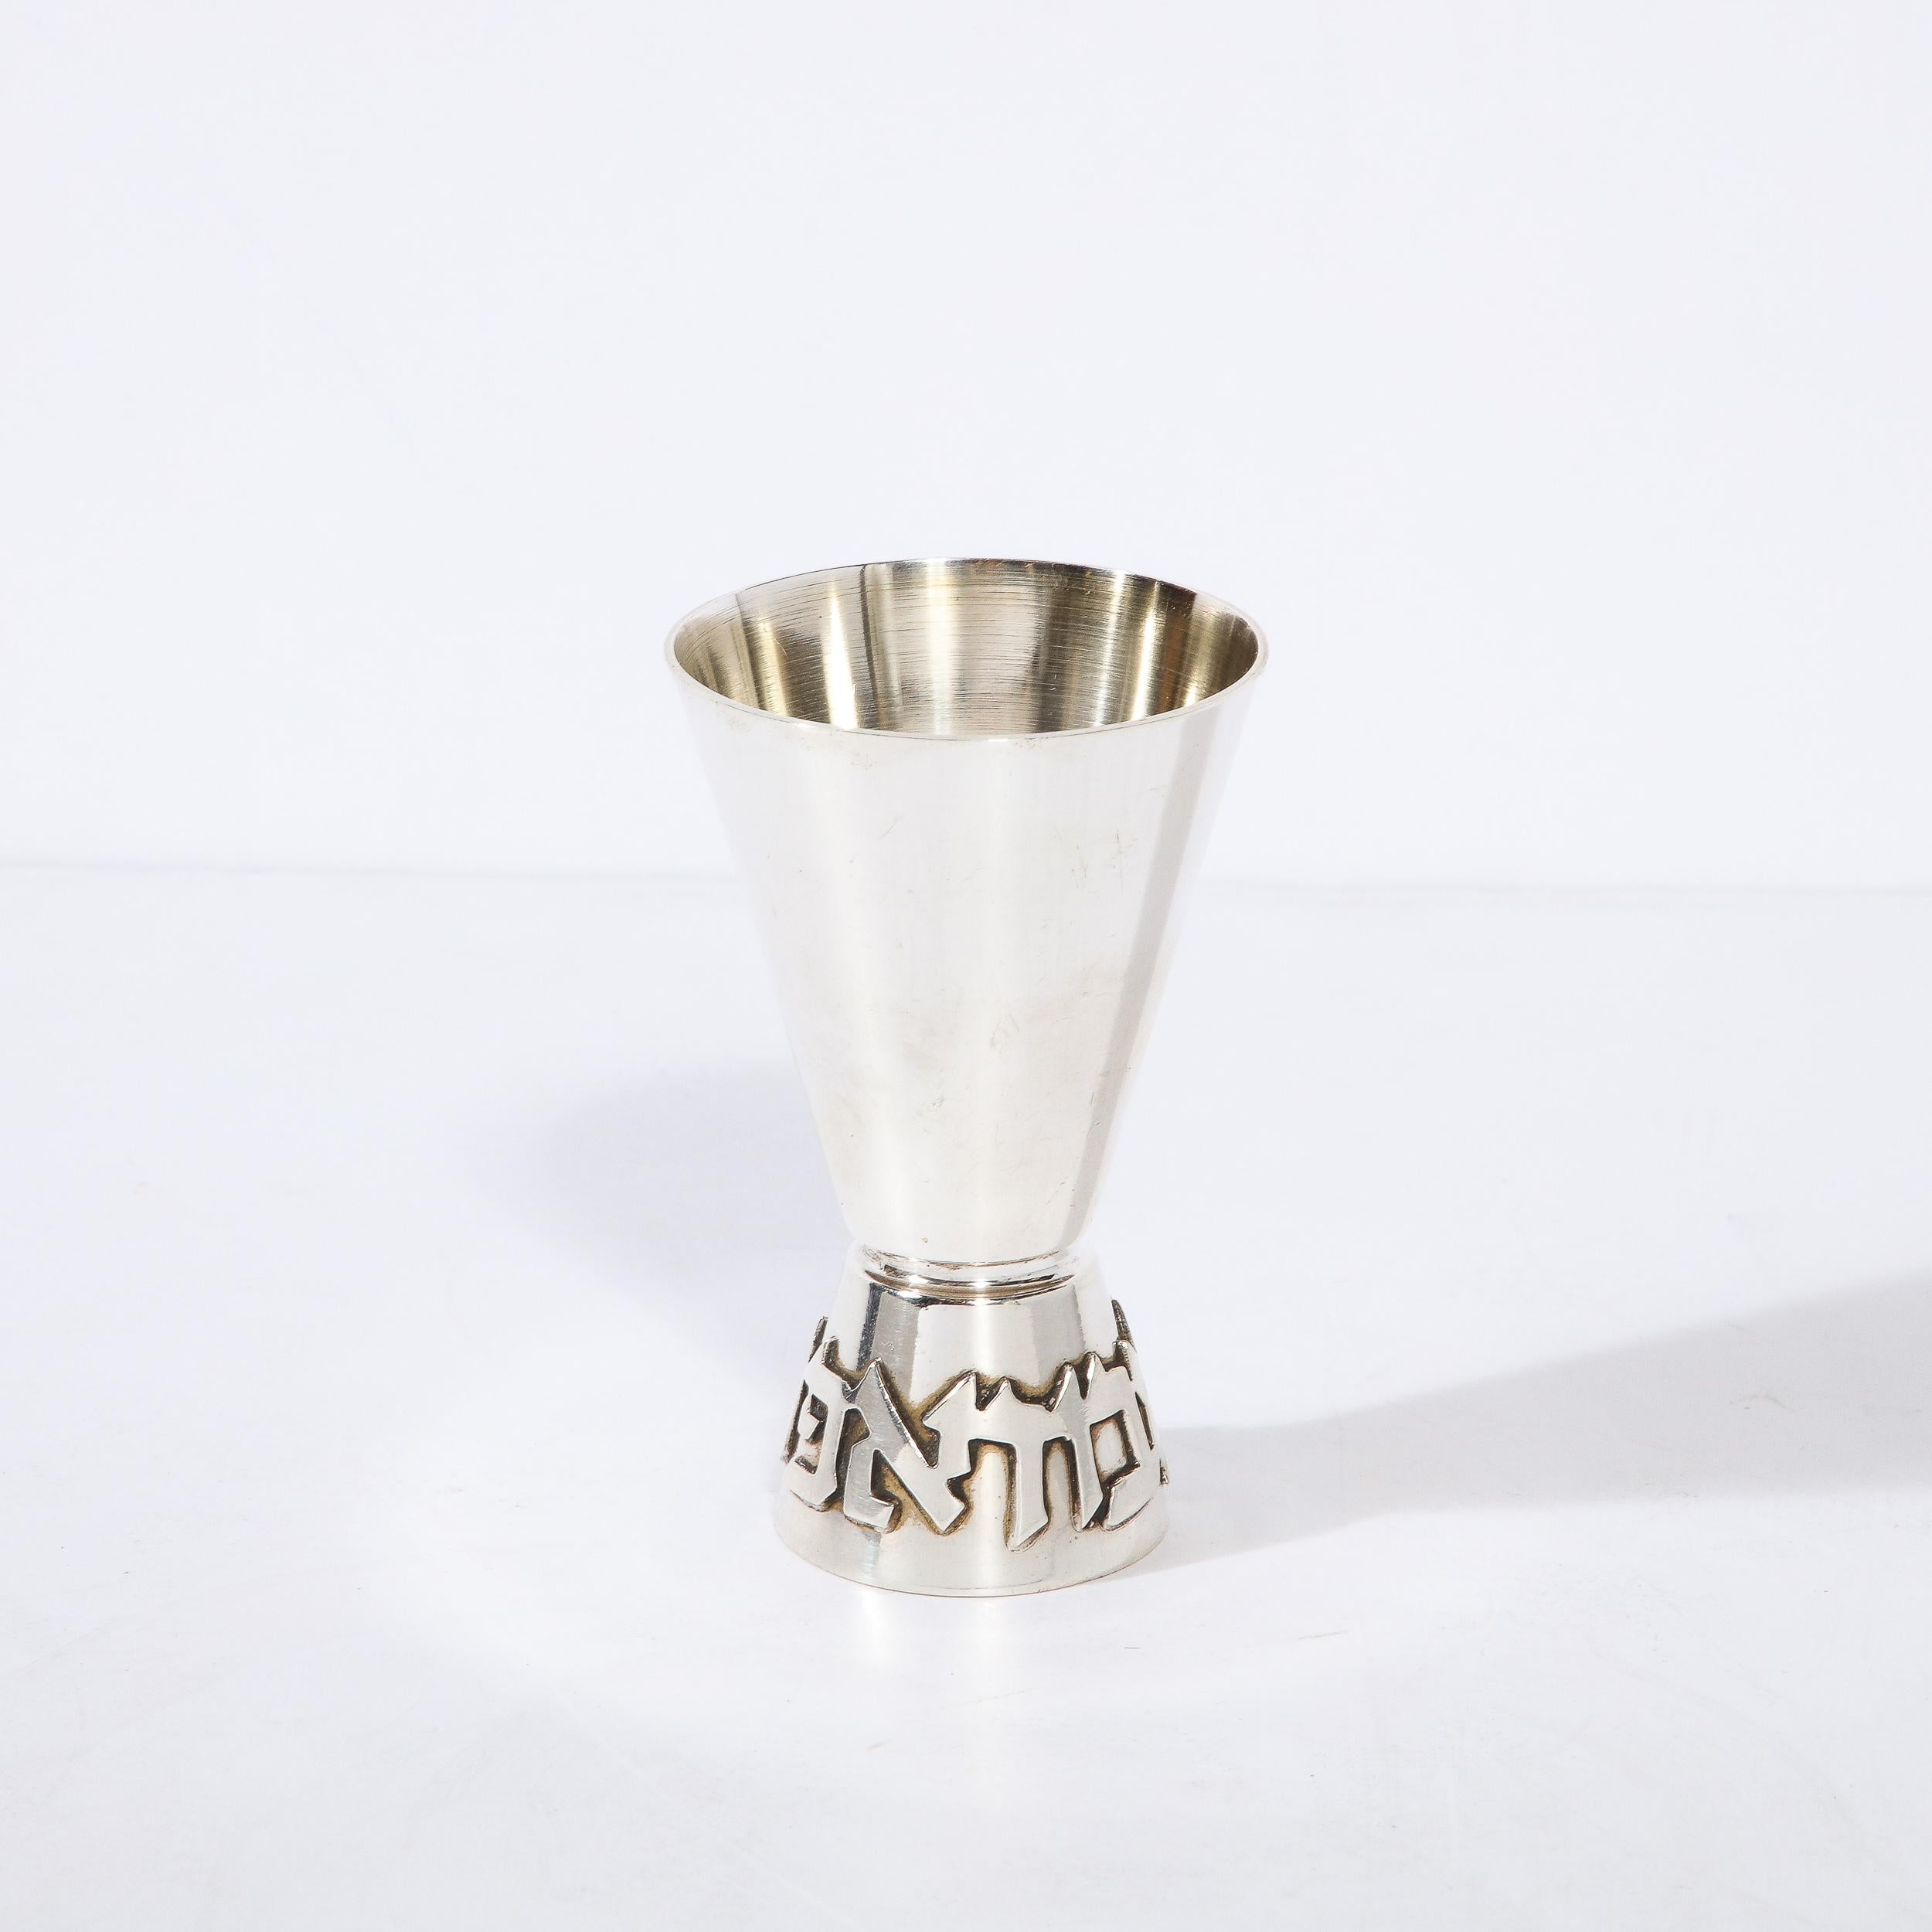 Mid-Century Modern Sterling Silver Kiddish Cup with Hebrew Lettered Base by Ludwig Wolpert For Sale